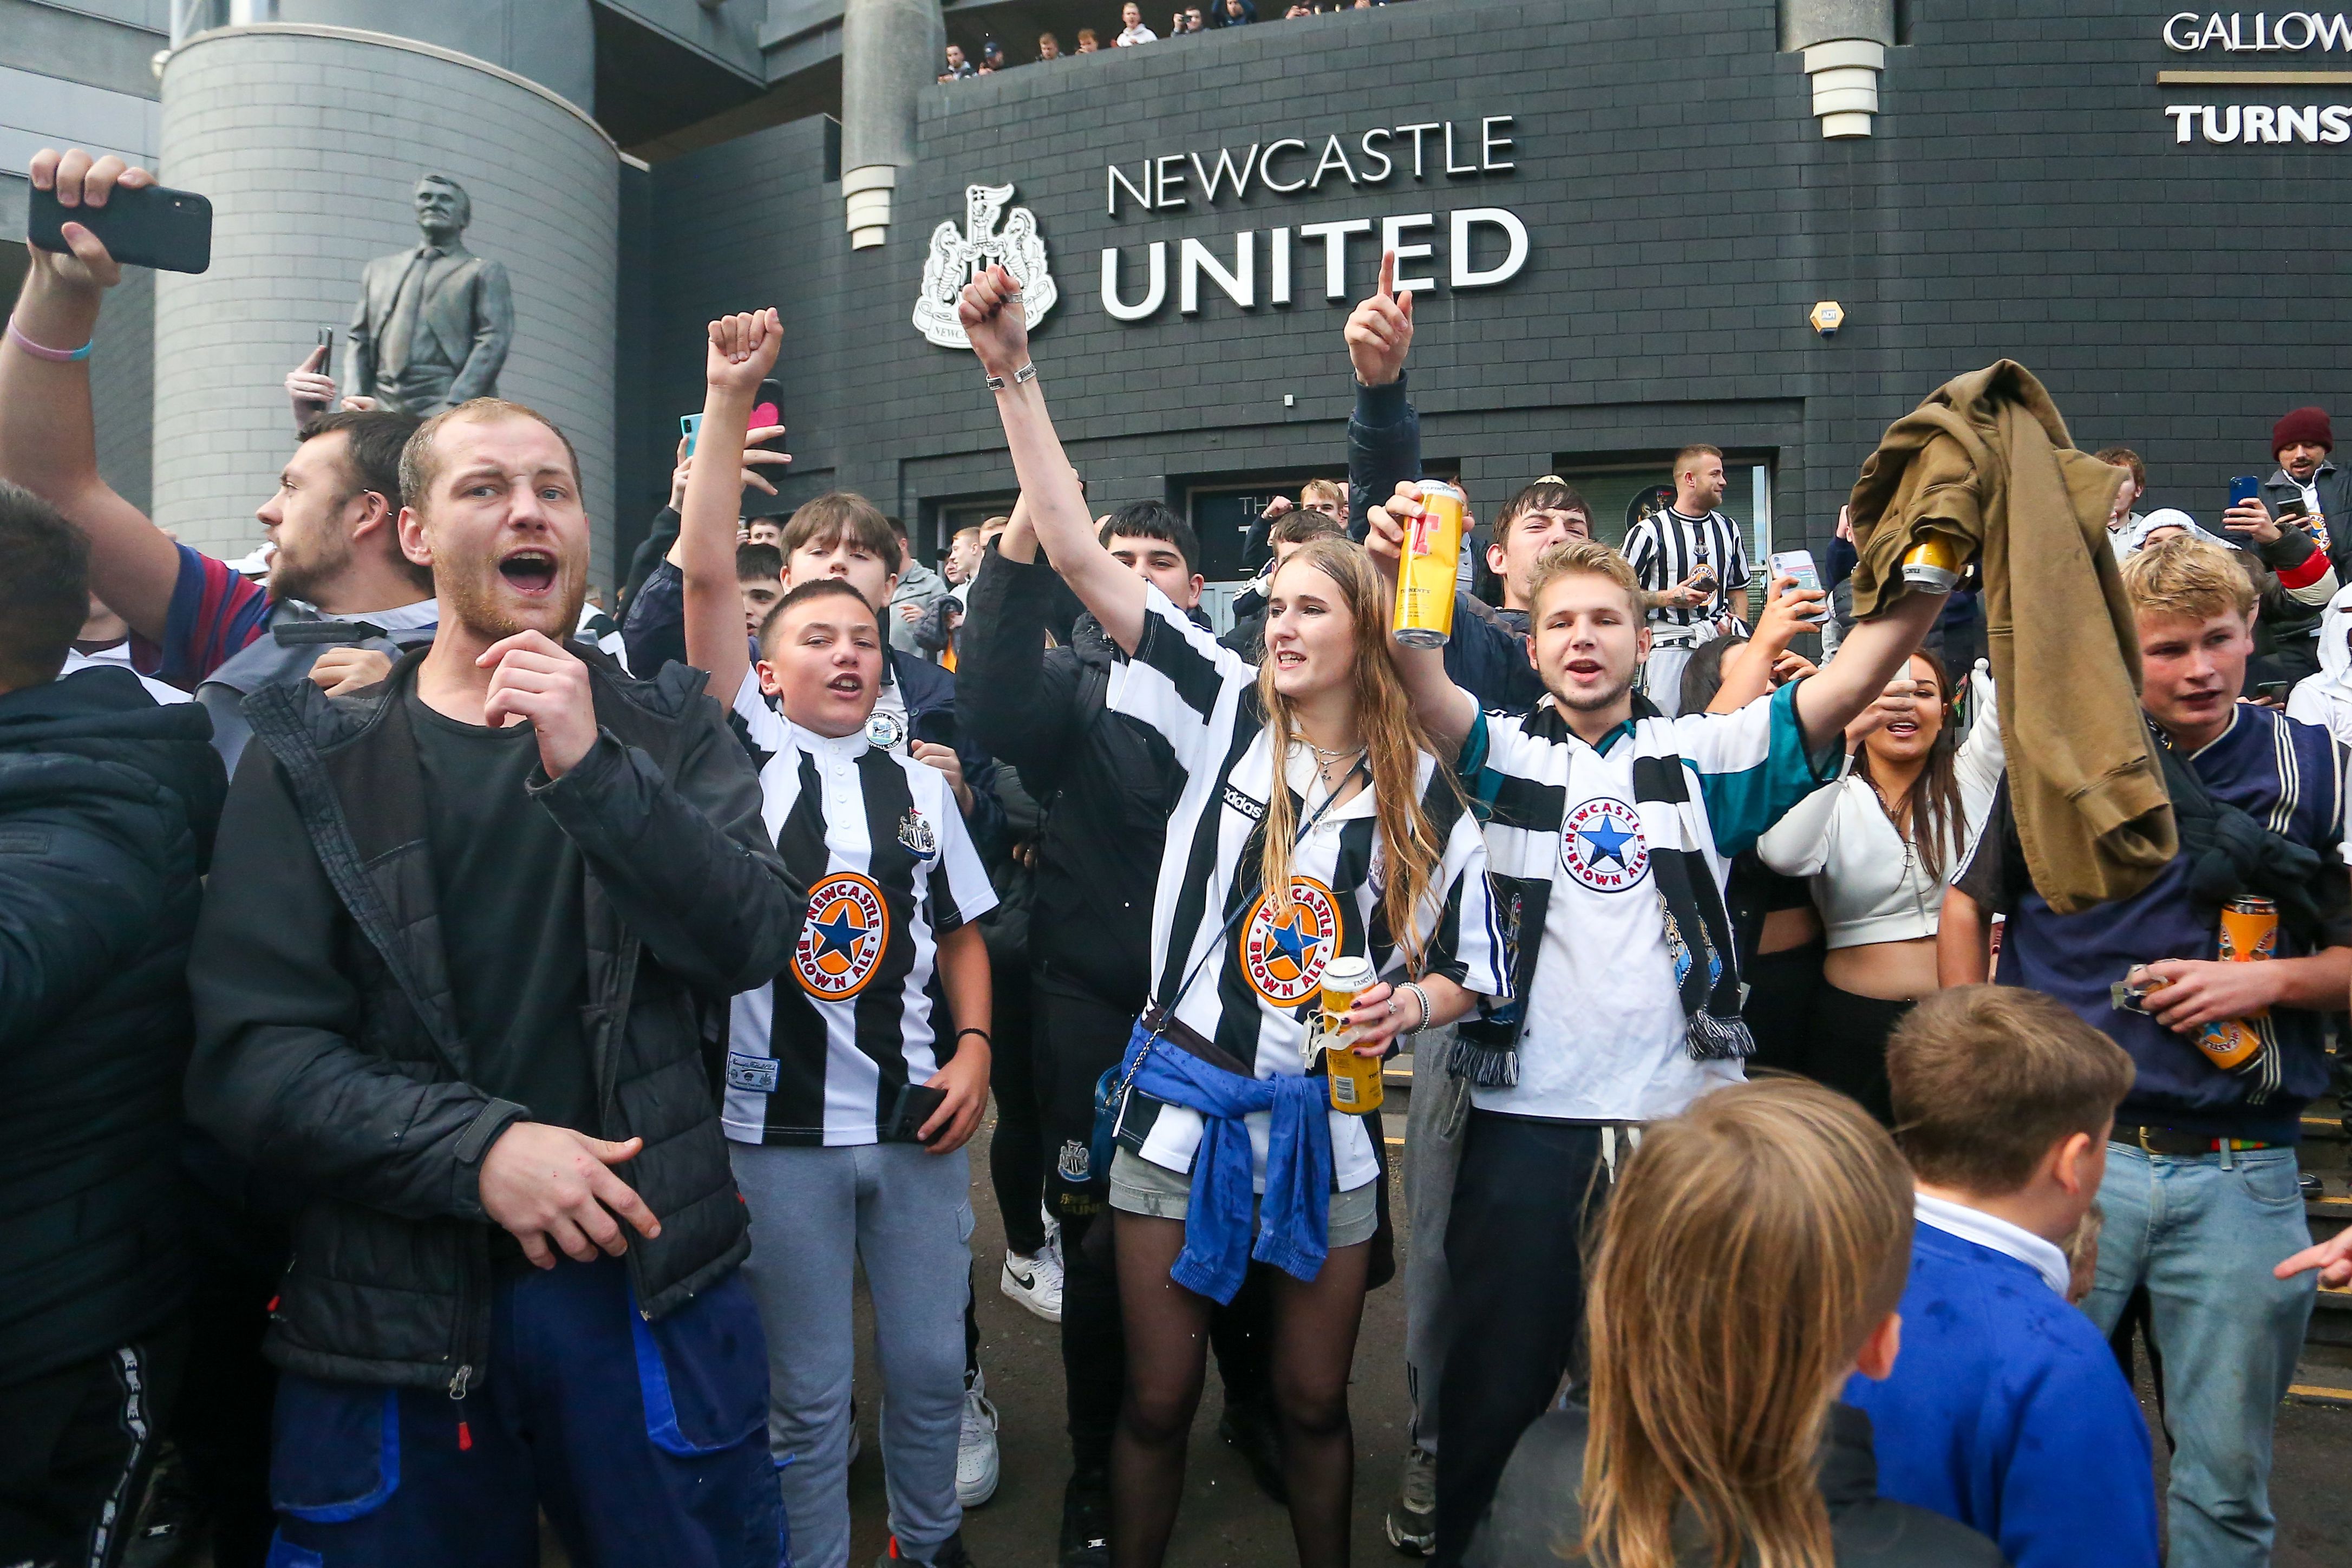 Picture of people wearing Newcastle United uniforms celebrating